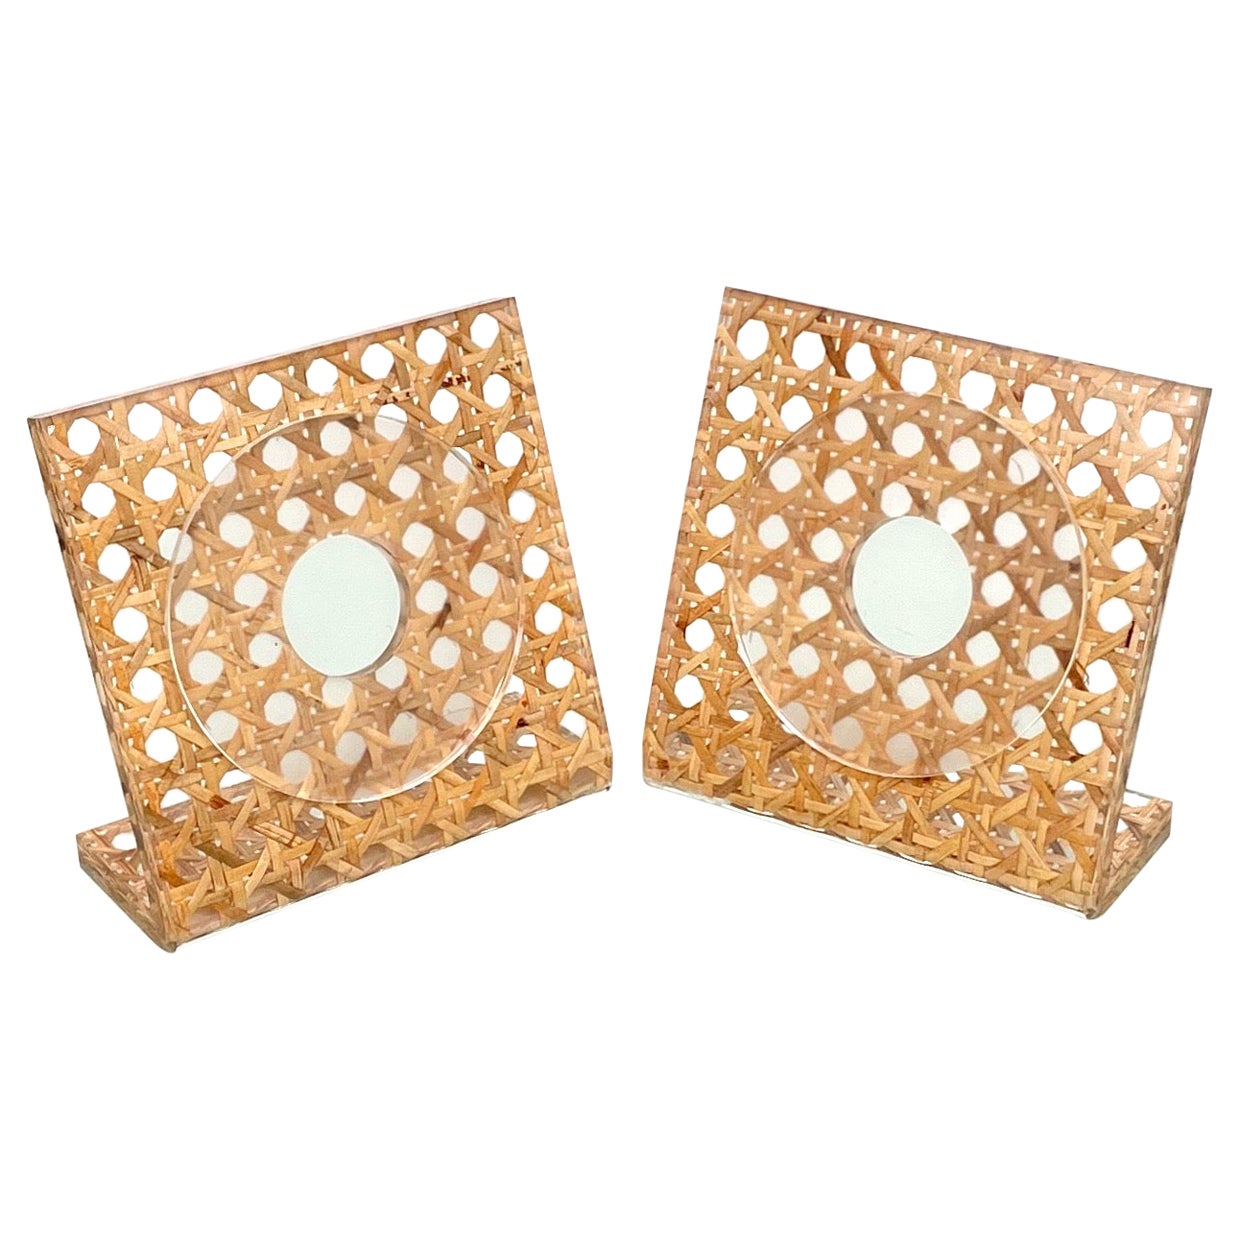 Pair of Lucite & Rattan Squared Picture Frame Christian Dior Style, Italy, 1970s For Sale